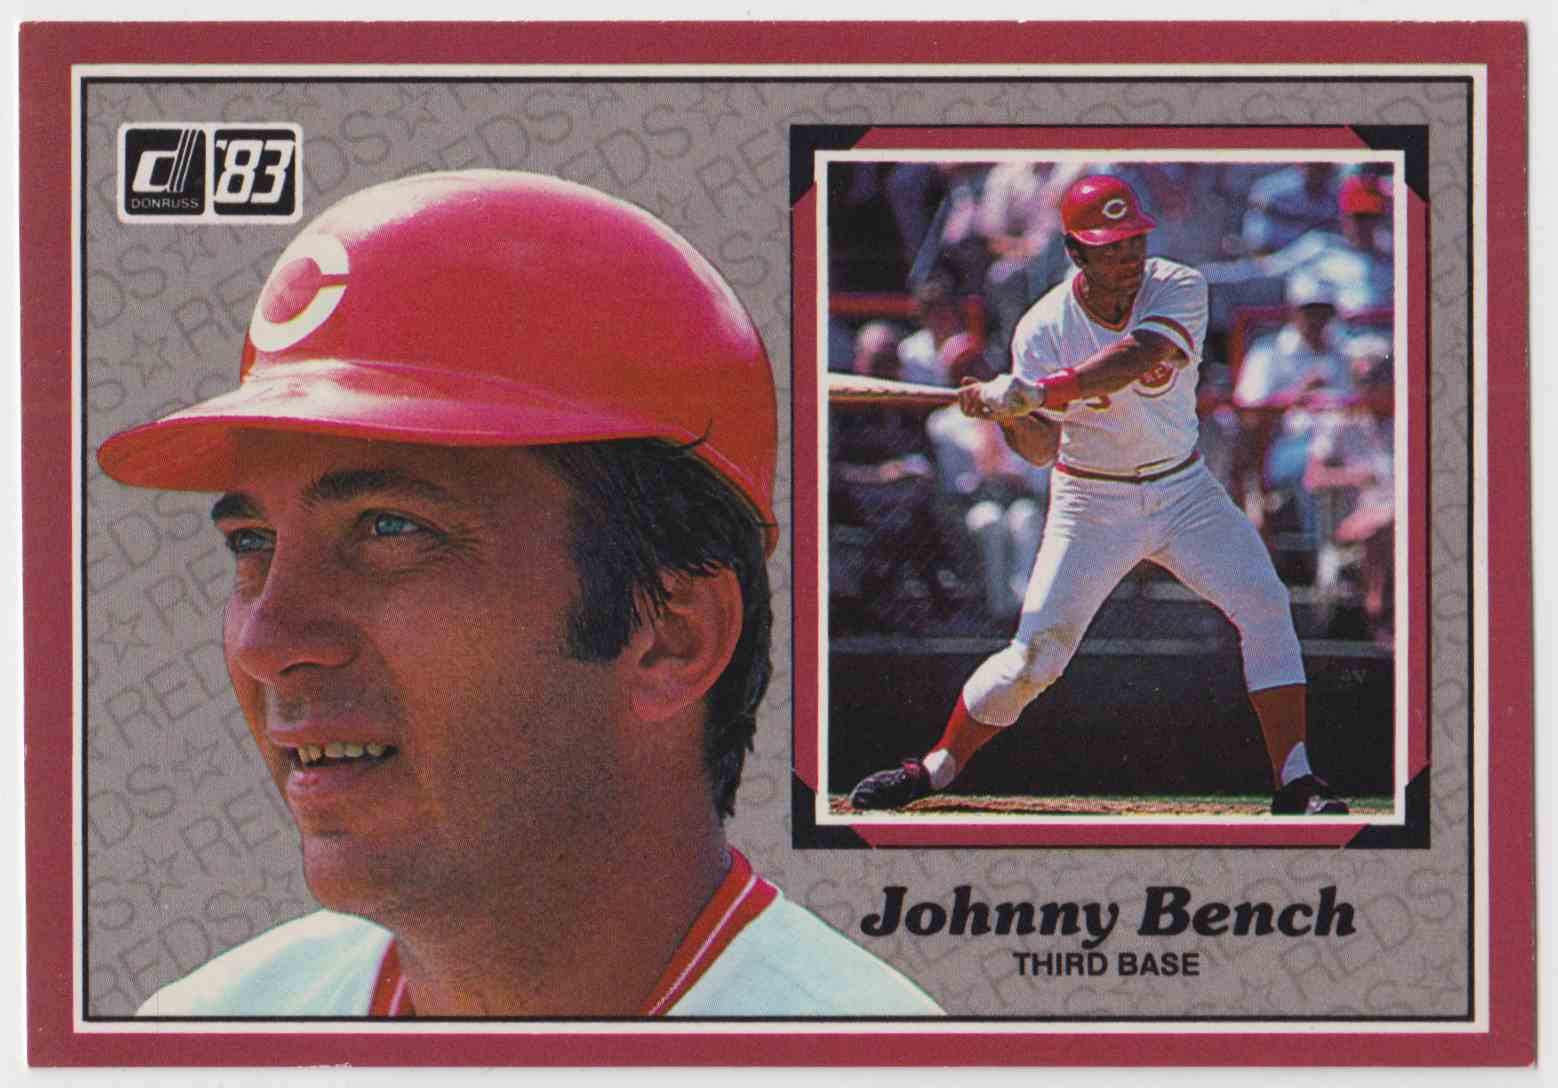 2014 Topps All Rookie Cup Johnny Bench Cincinnati Reds #RCT-9